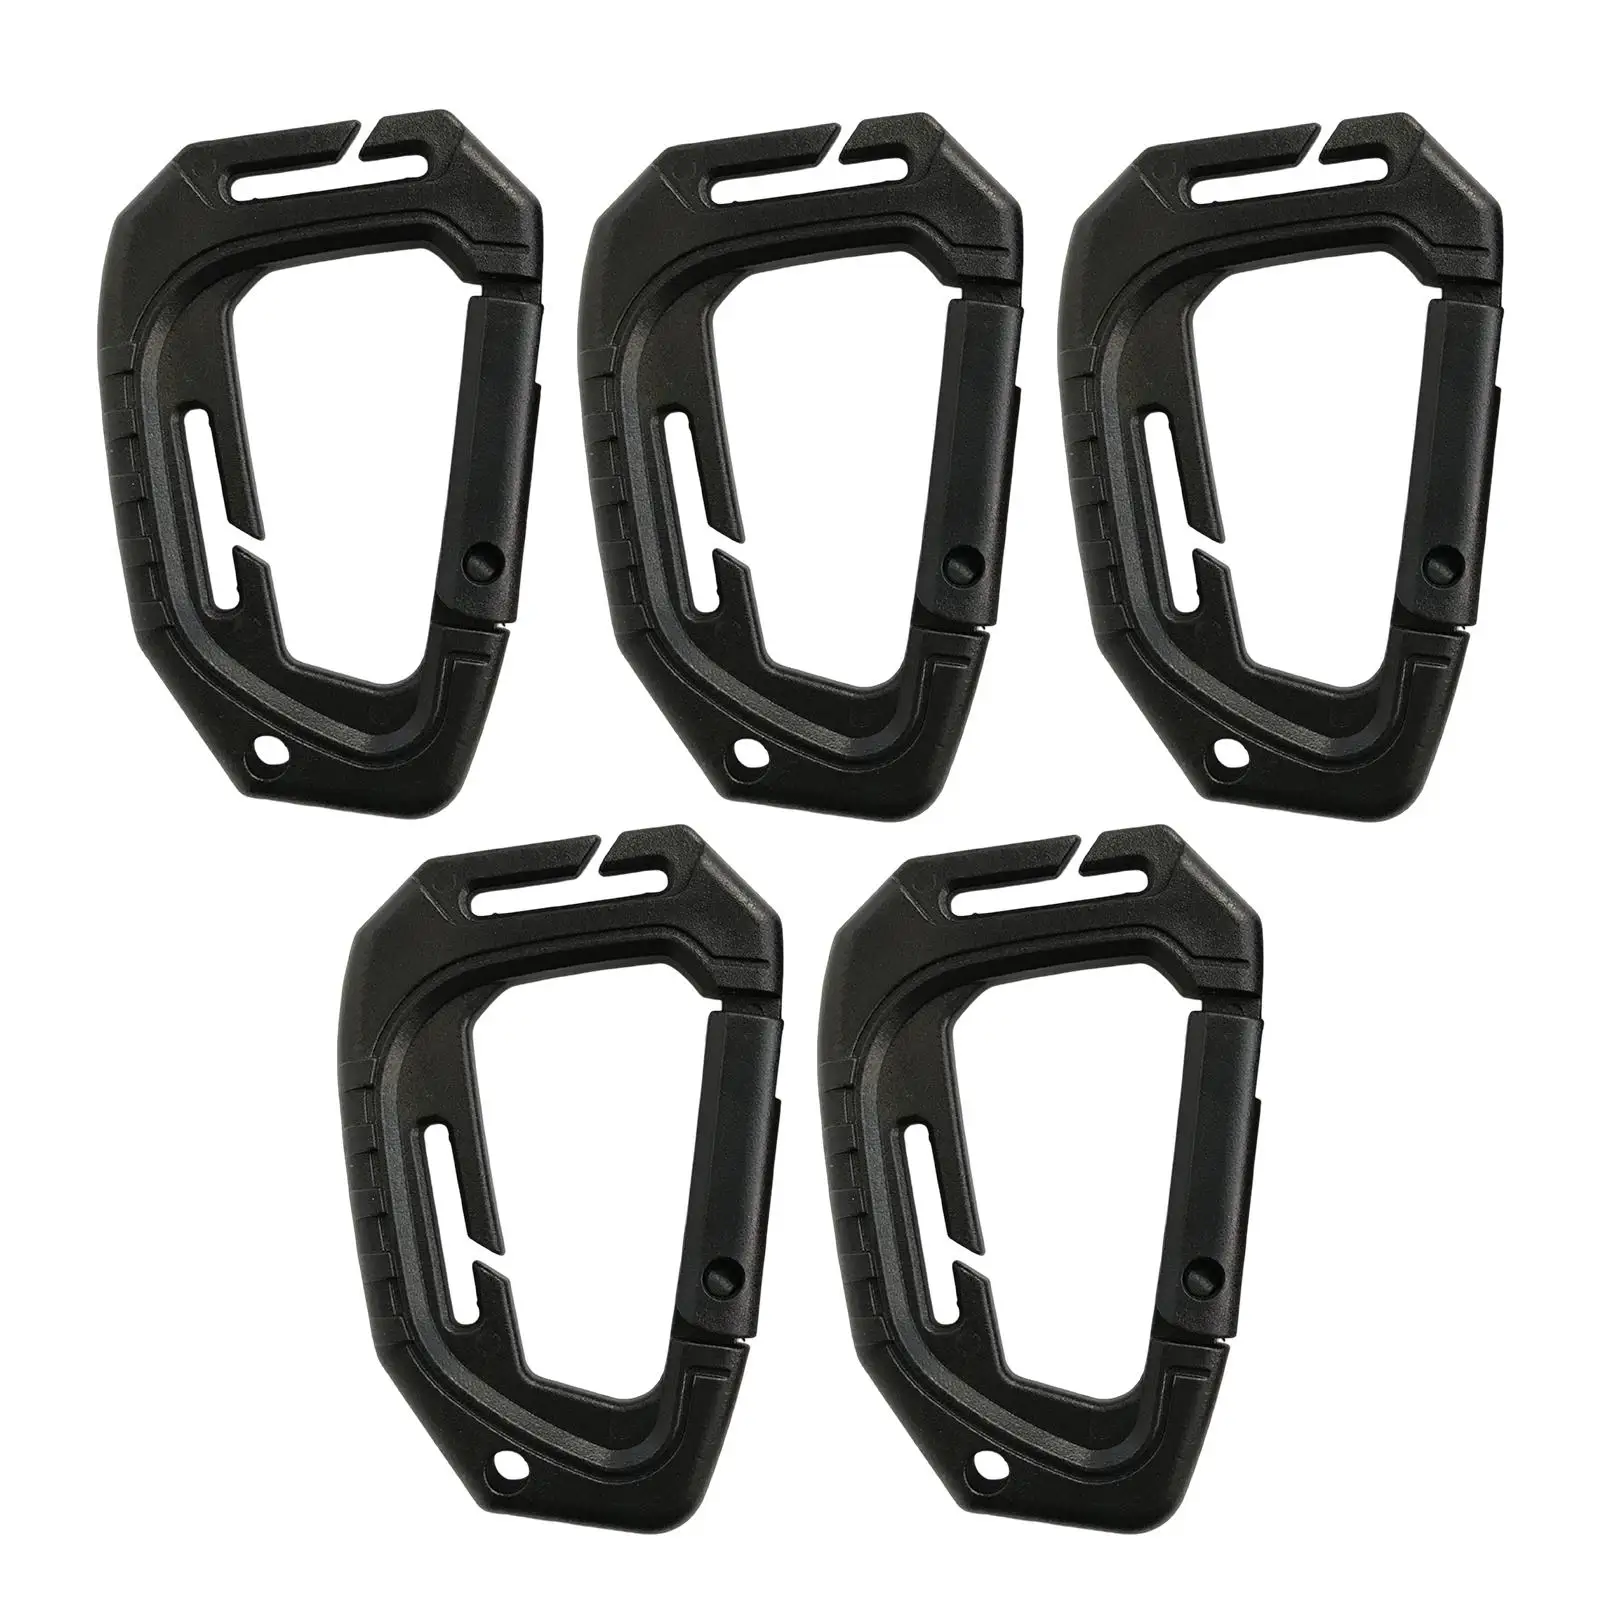 5Pcs D Shaped Carabiner Attachment Webbing Release Hook Keychain Carabiners for Backpack Keys Water Bottle Camping Outdoor